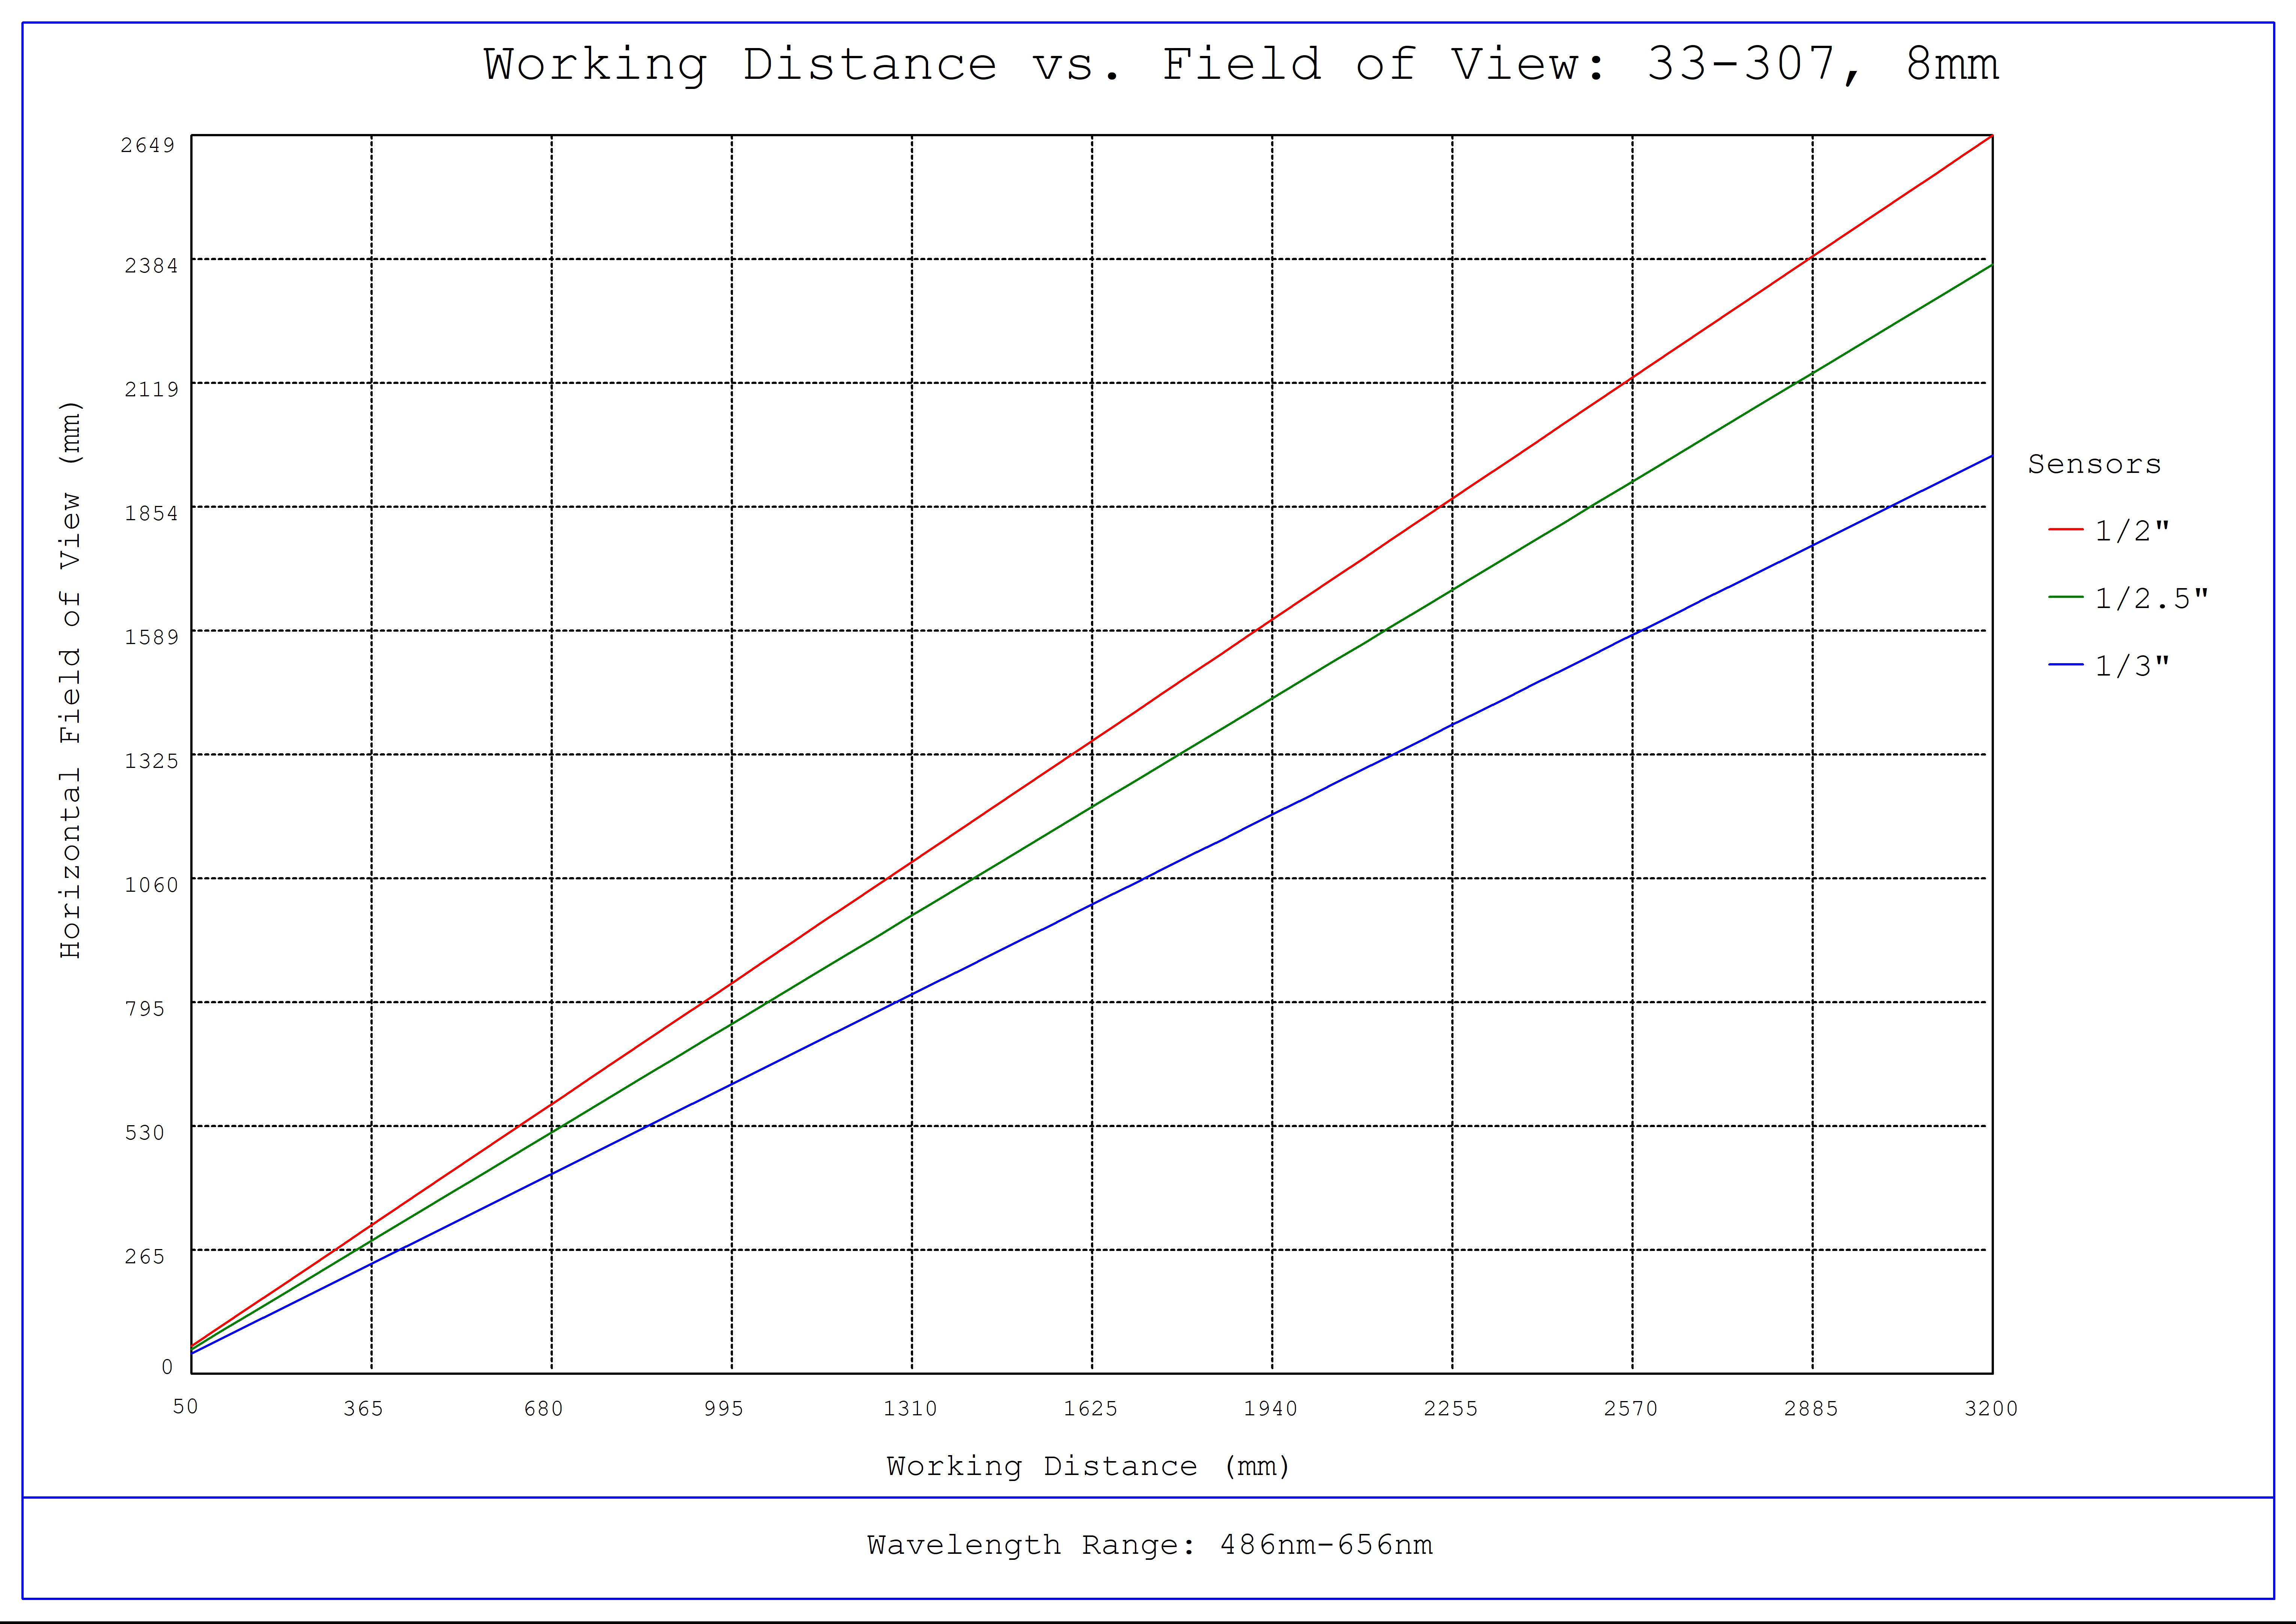 #33-307, 8mm UC Series Fixed Focal Length Lens, Working Distance versus Field of View Plot